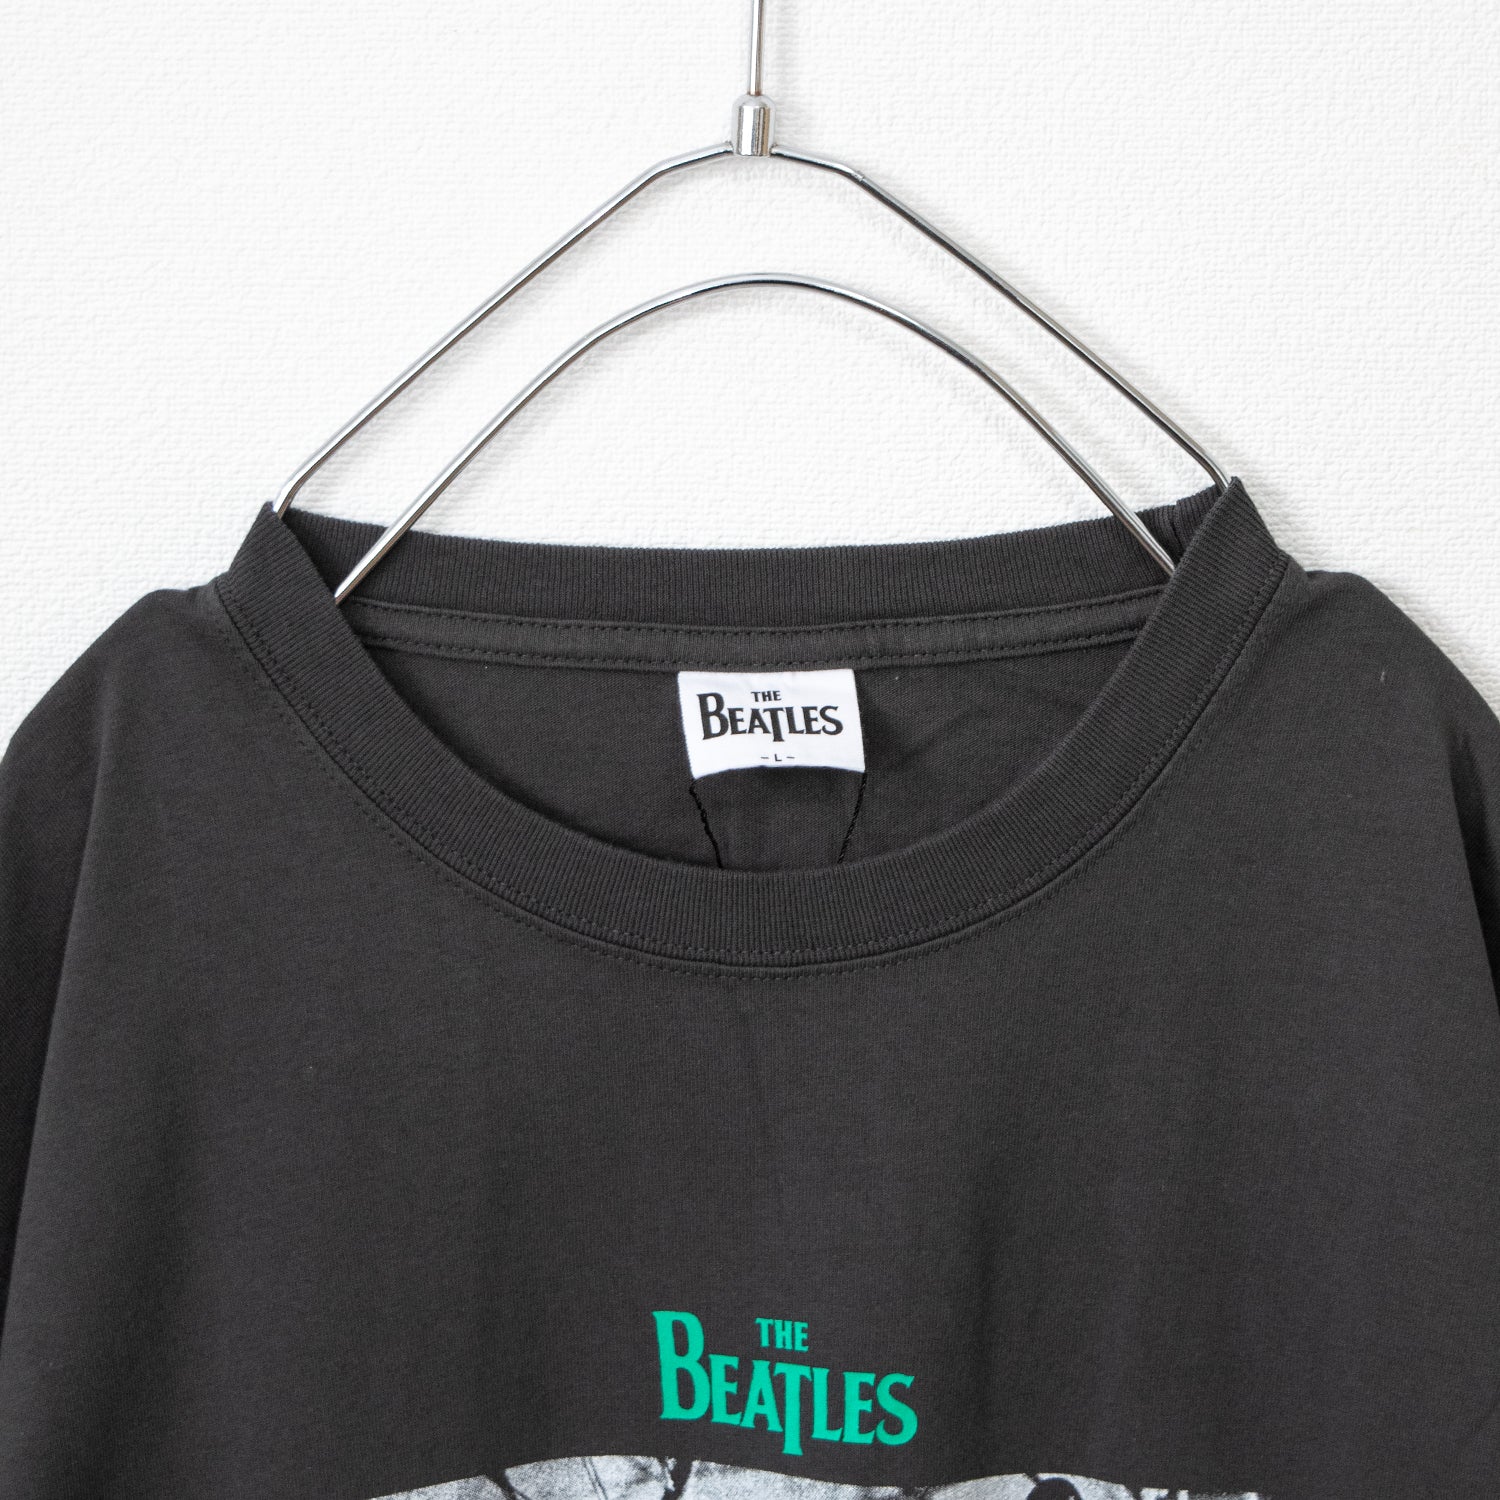 THE BEATLES Photo Print S/S T-shirt - YOUAREMYPOISON